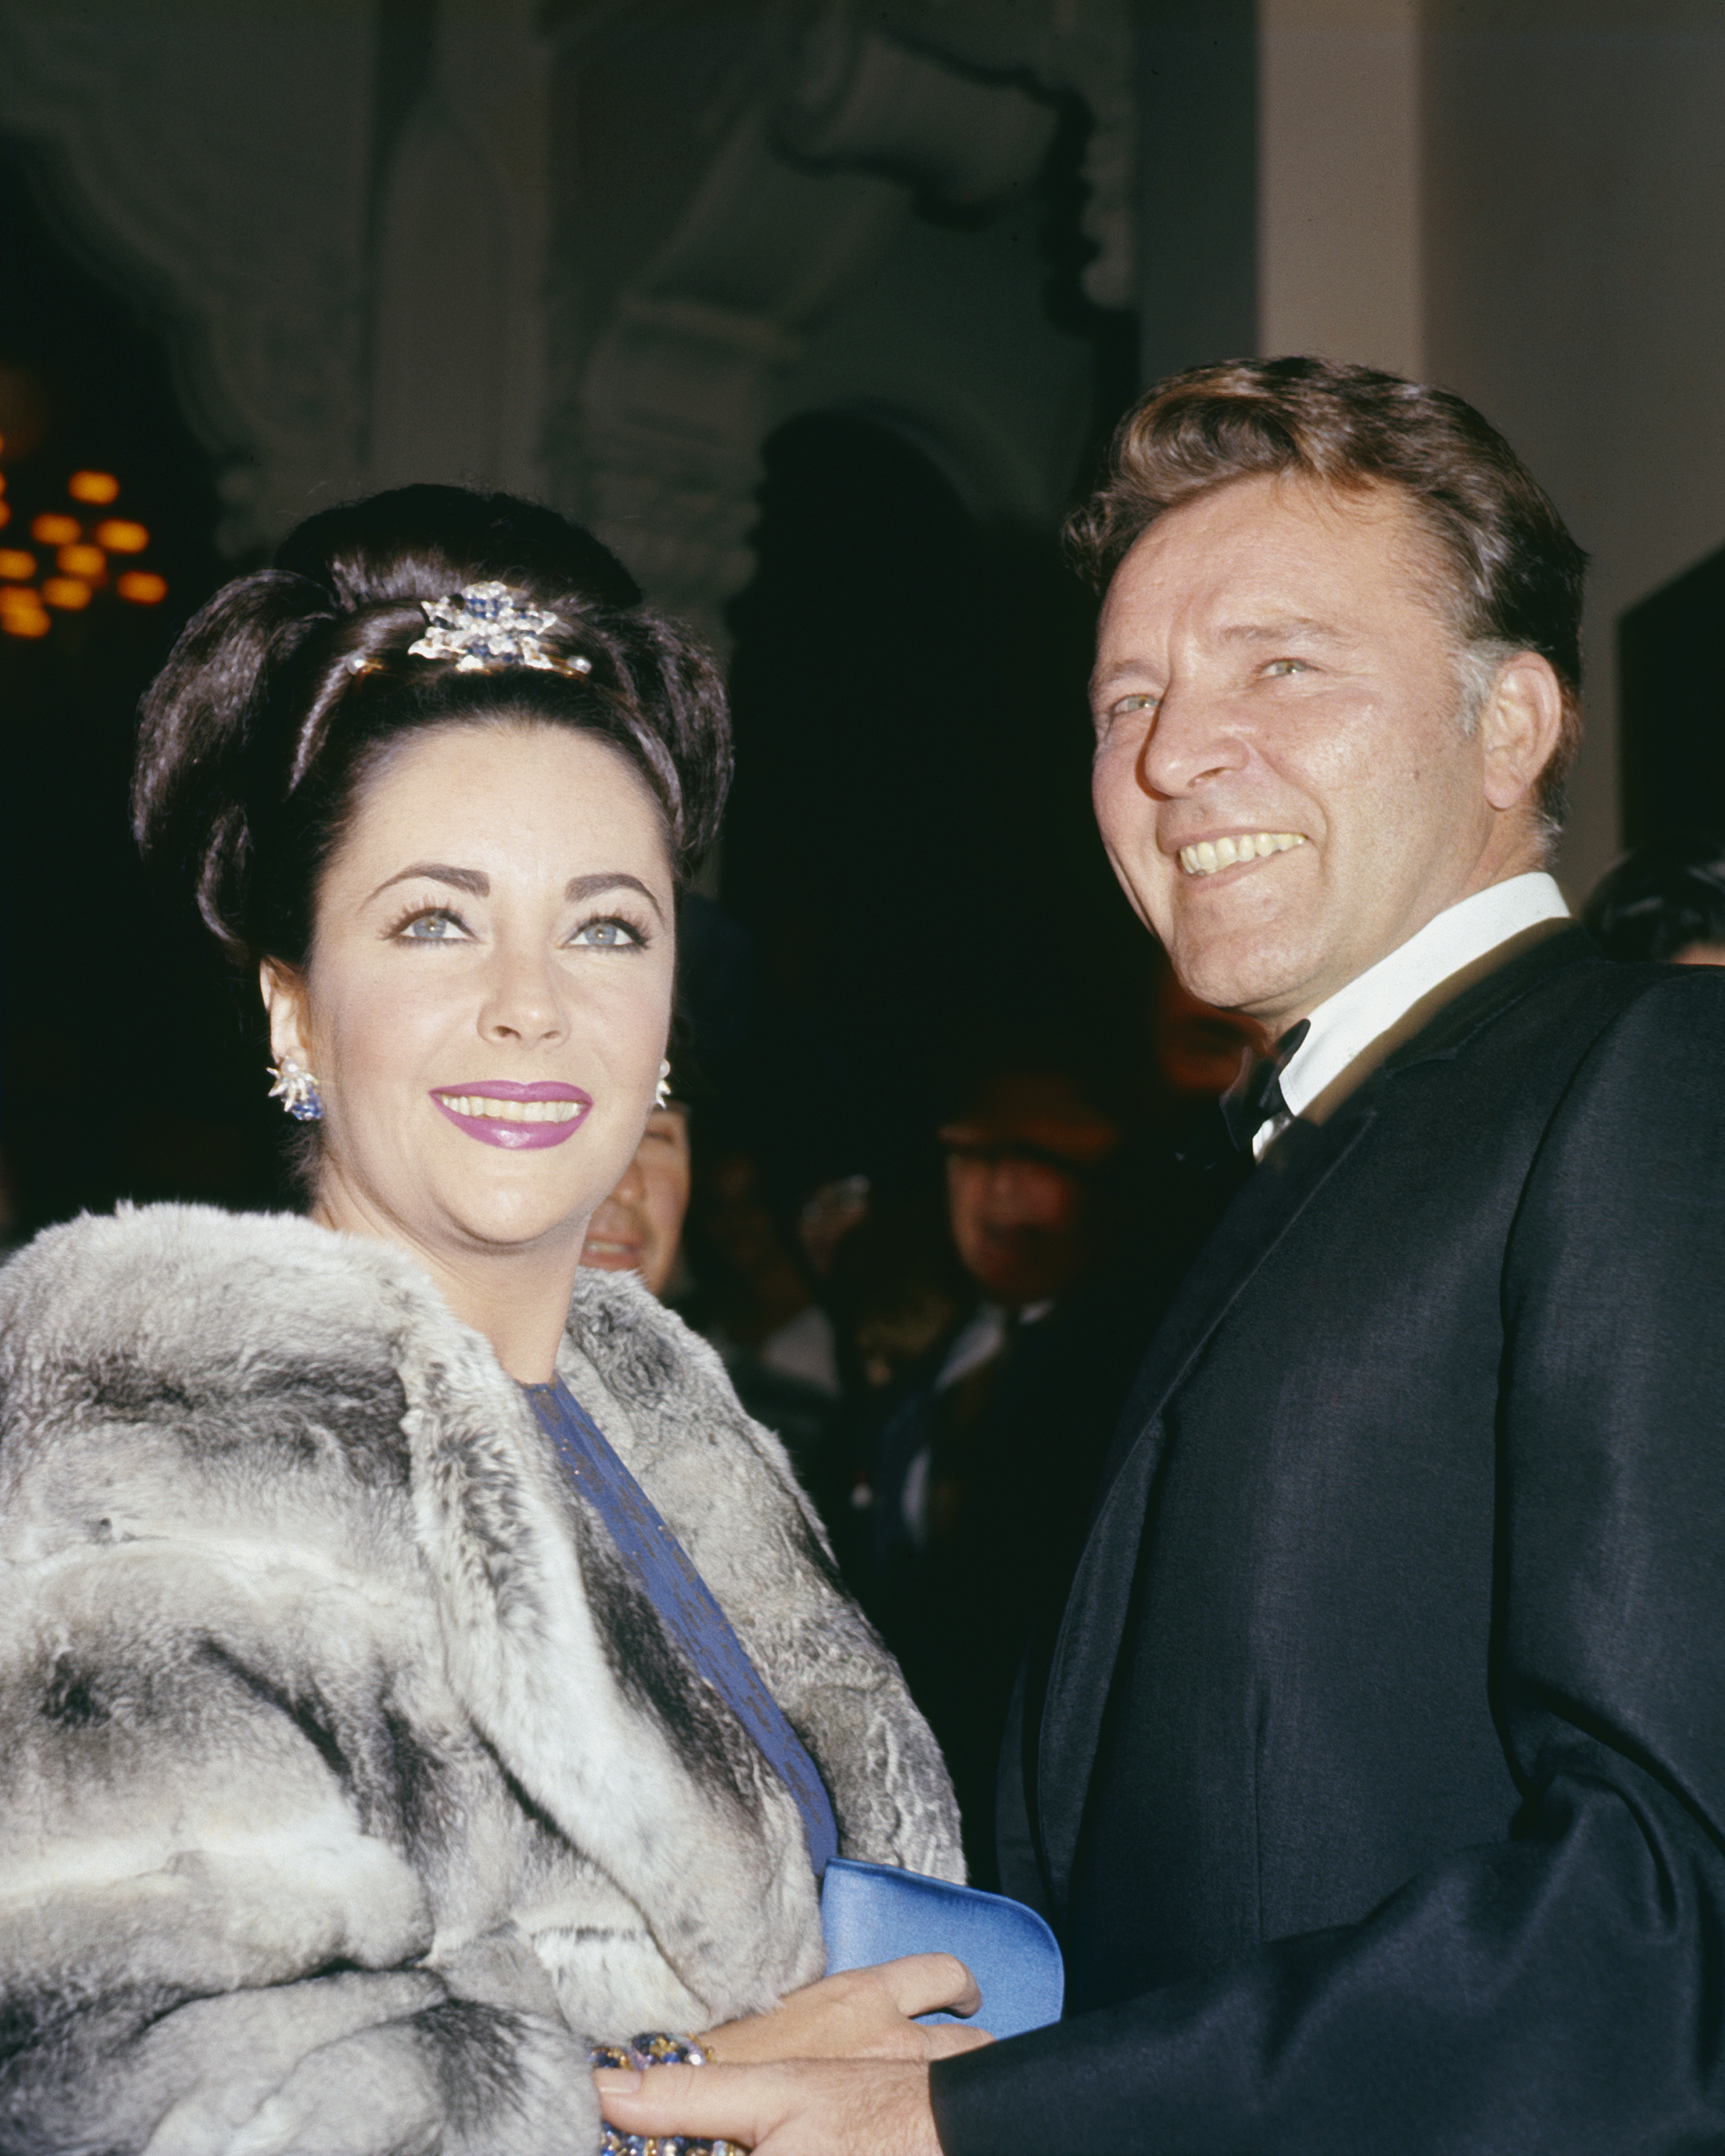 Elizabeth Taylor and Richard Burton attend the premiere of the latter's film, "The Spy Who Came in from the Cold" at the Warner Hollywood Theater in December 1965 in Hollywood, California. | Source: Getty Images